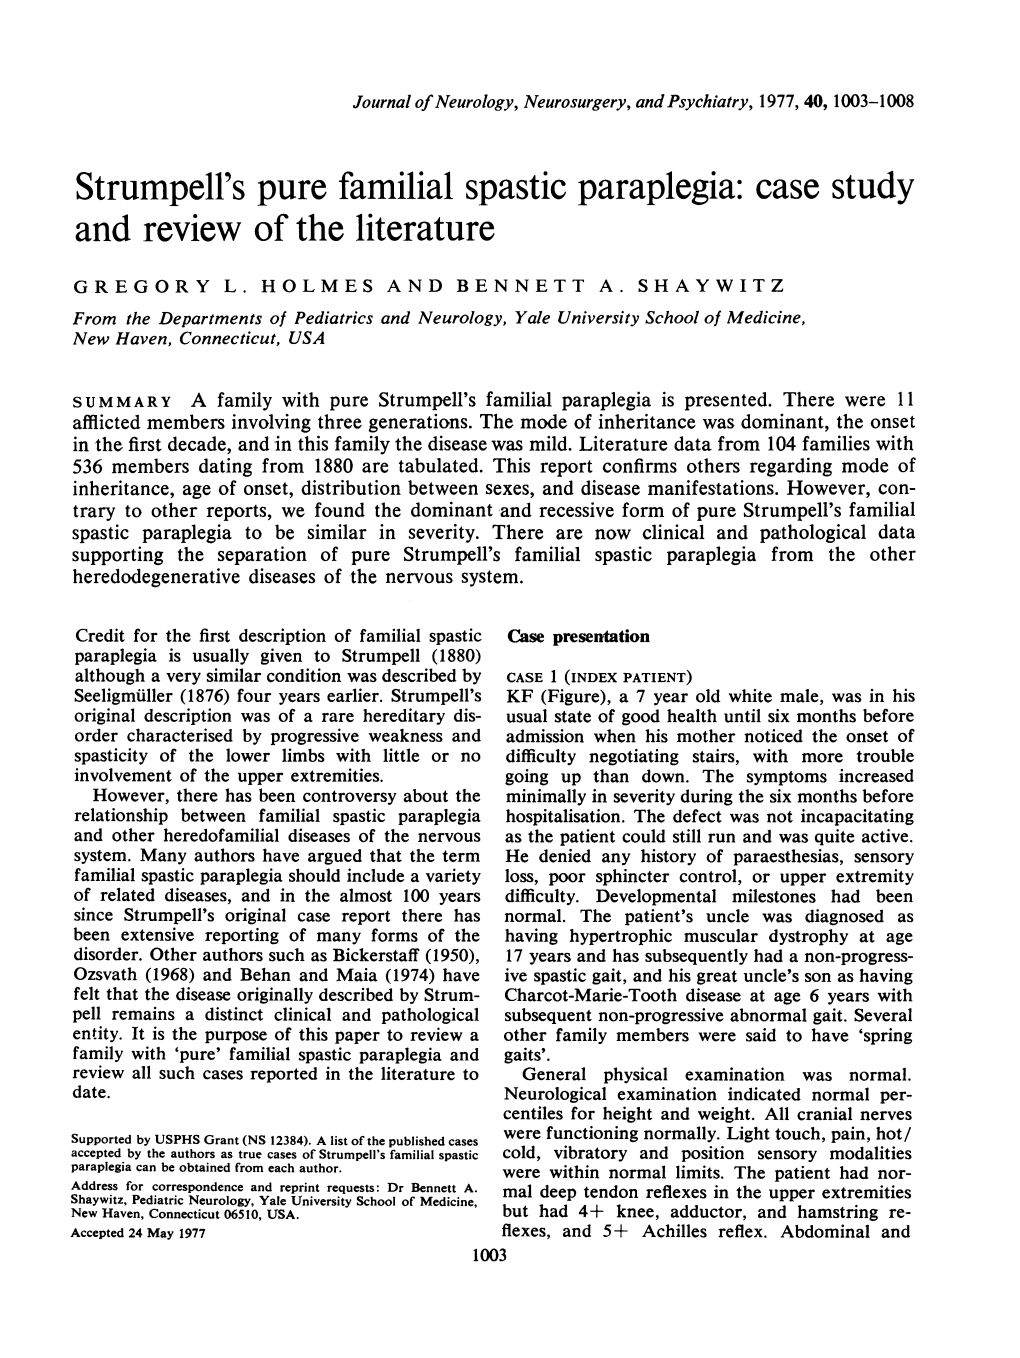 Strumpell's Pure Familial Spastic Paraplegia: Case Study and Review of the Literature